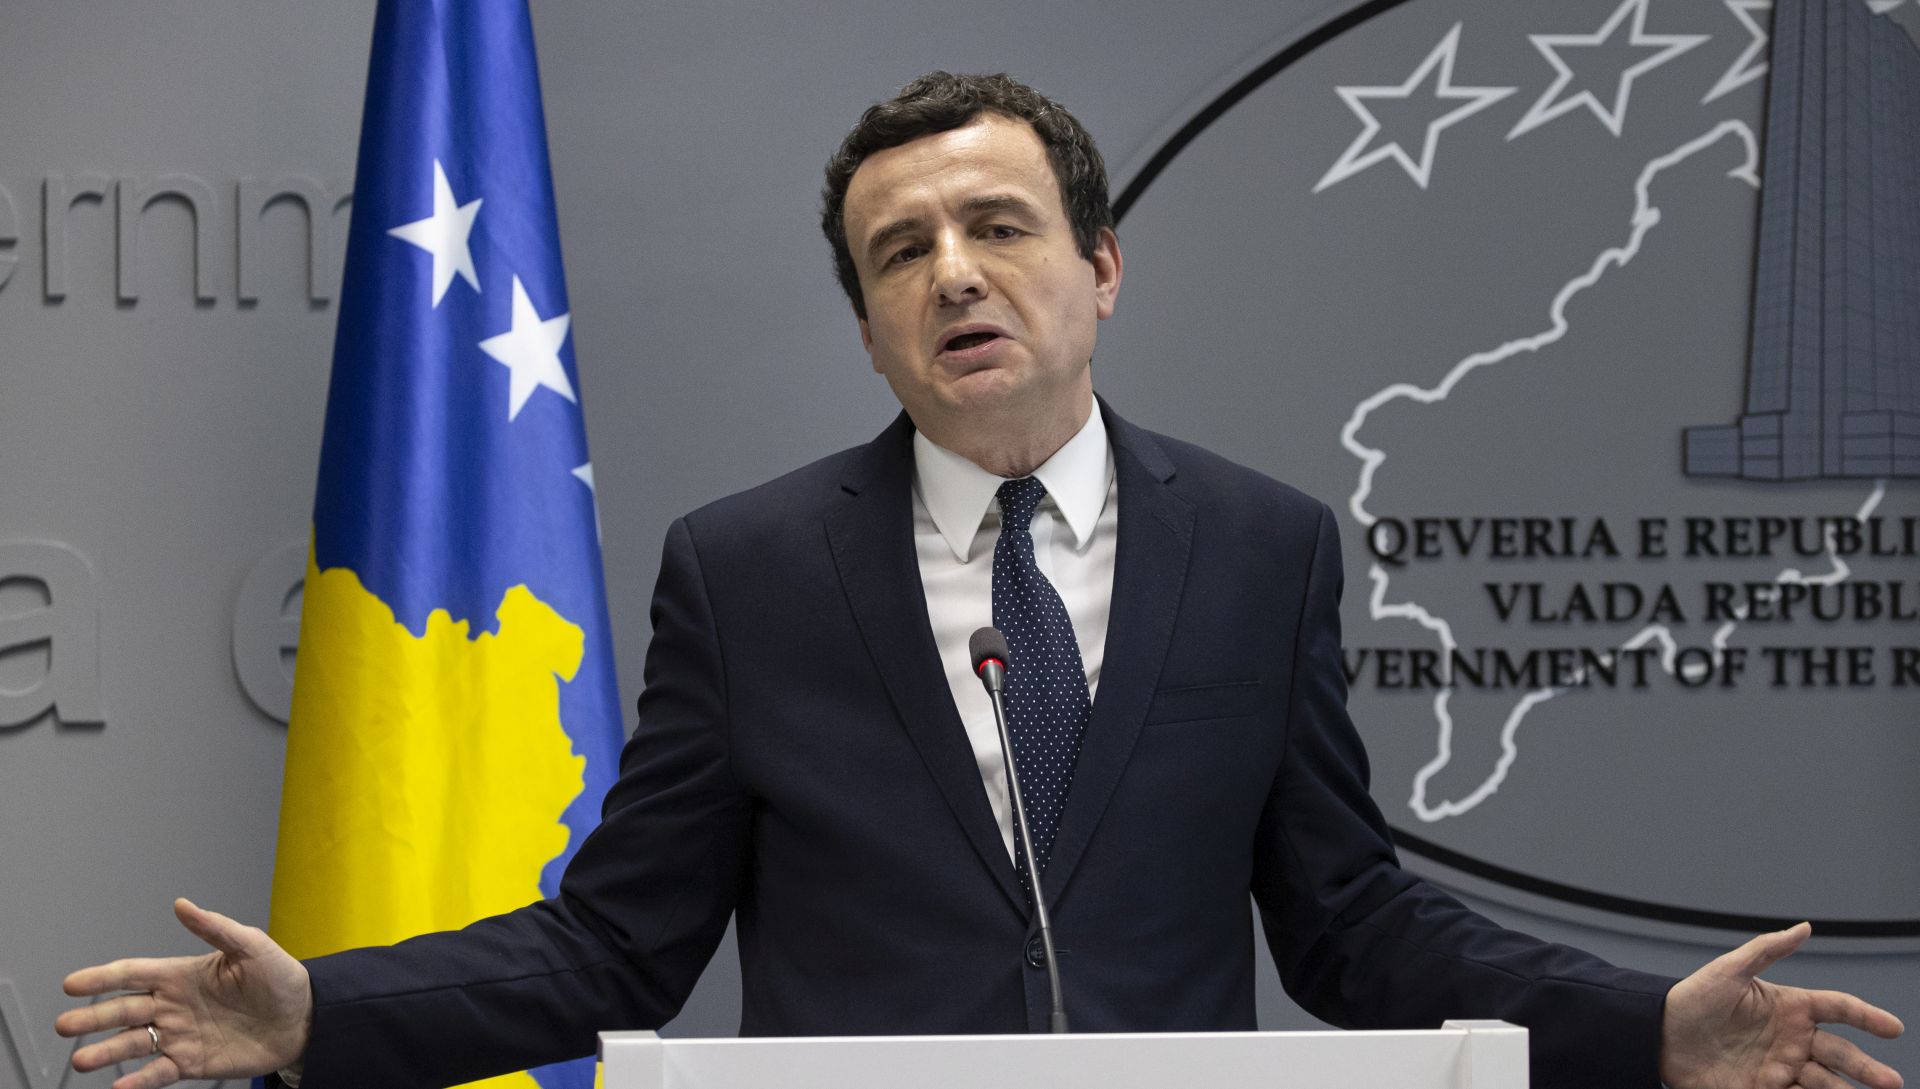 epa08249549 Prime minister of the Republic of Kosovo Albin Kurti gestures during an extraordinary press conference in Pristina, Kosovo, 26 February 2020. The Prime Minister of the Republic of Kosovo, Albin Kurti, through an official letter informed the Speaker of the Assembly of the Republic of Kosovo on the constitutional implications of the exchange of letters dated April 19, 2013 between the then Prime Minister Hashim Thaci and the then Secretary General of NATO, Anders Fogh Rasmussen. Through this agreement, Prime Minister Thaci, on behalf of the Republic of Kosovo, transferred to KFOR the absolute veto power over all future Kosovo Security Force (KSF) missions in the north of Kosovo for an unenforceable period.  EPA/VALDRIN XHEMAJ